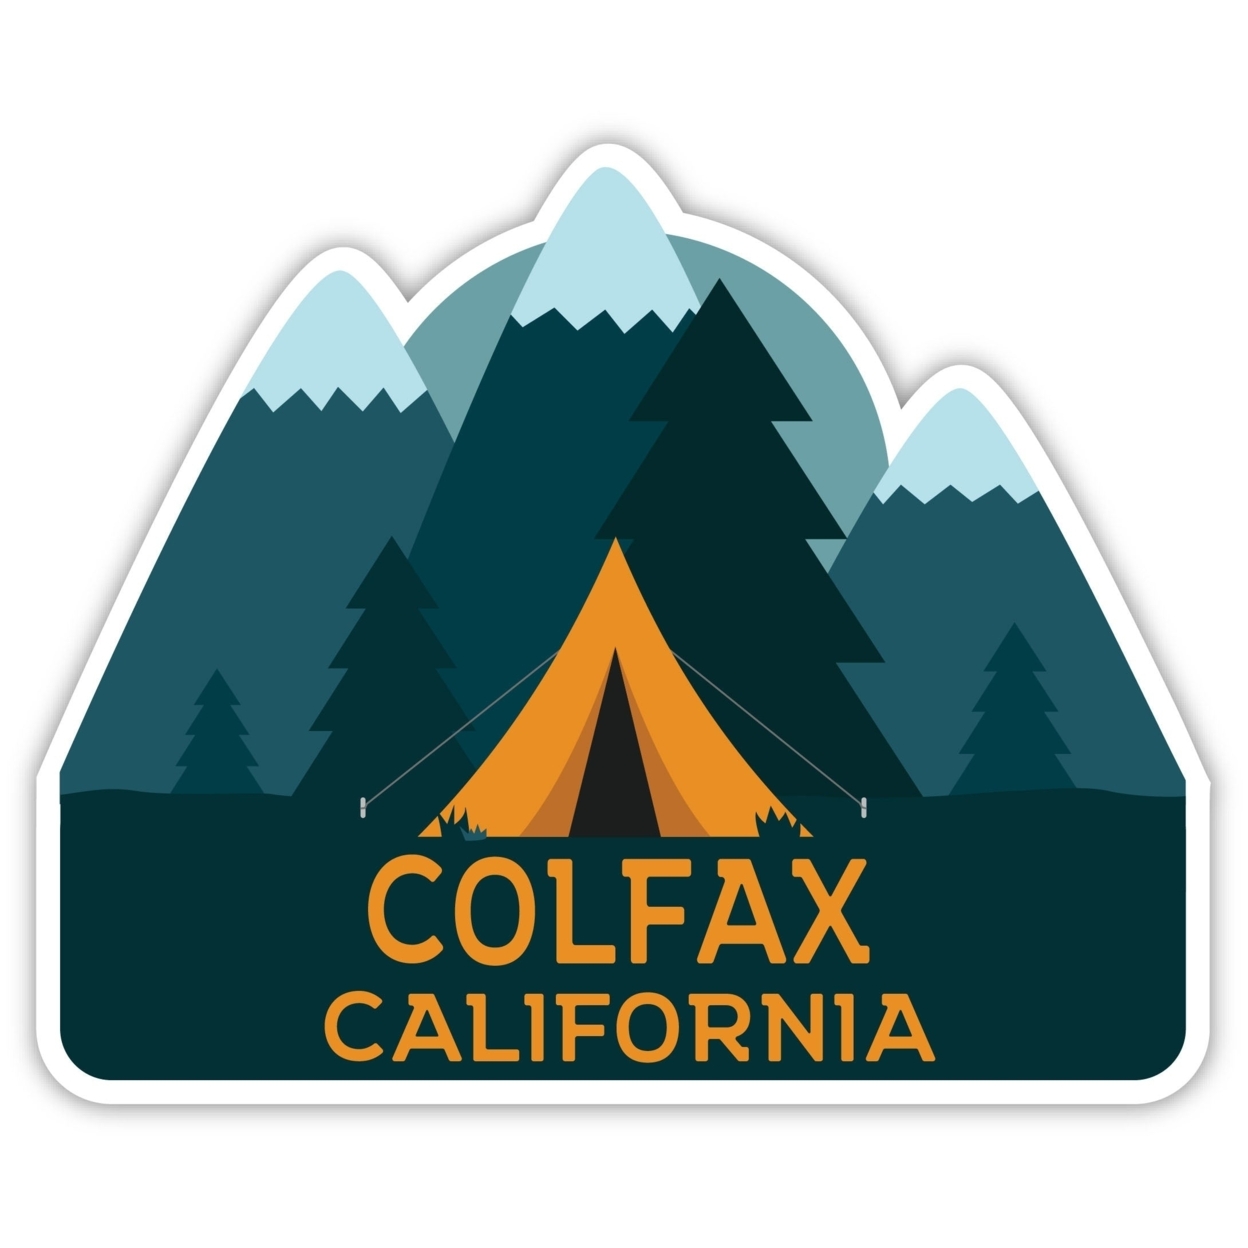 Colfax California Souvenir Decorative Stickers (Choose Theme And Size) - 4-Pack, 6-Inch, Tent